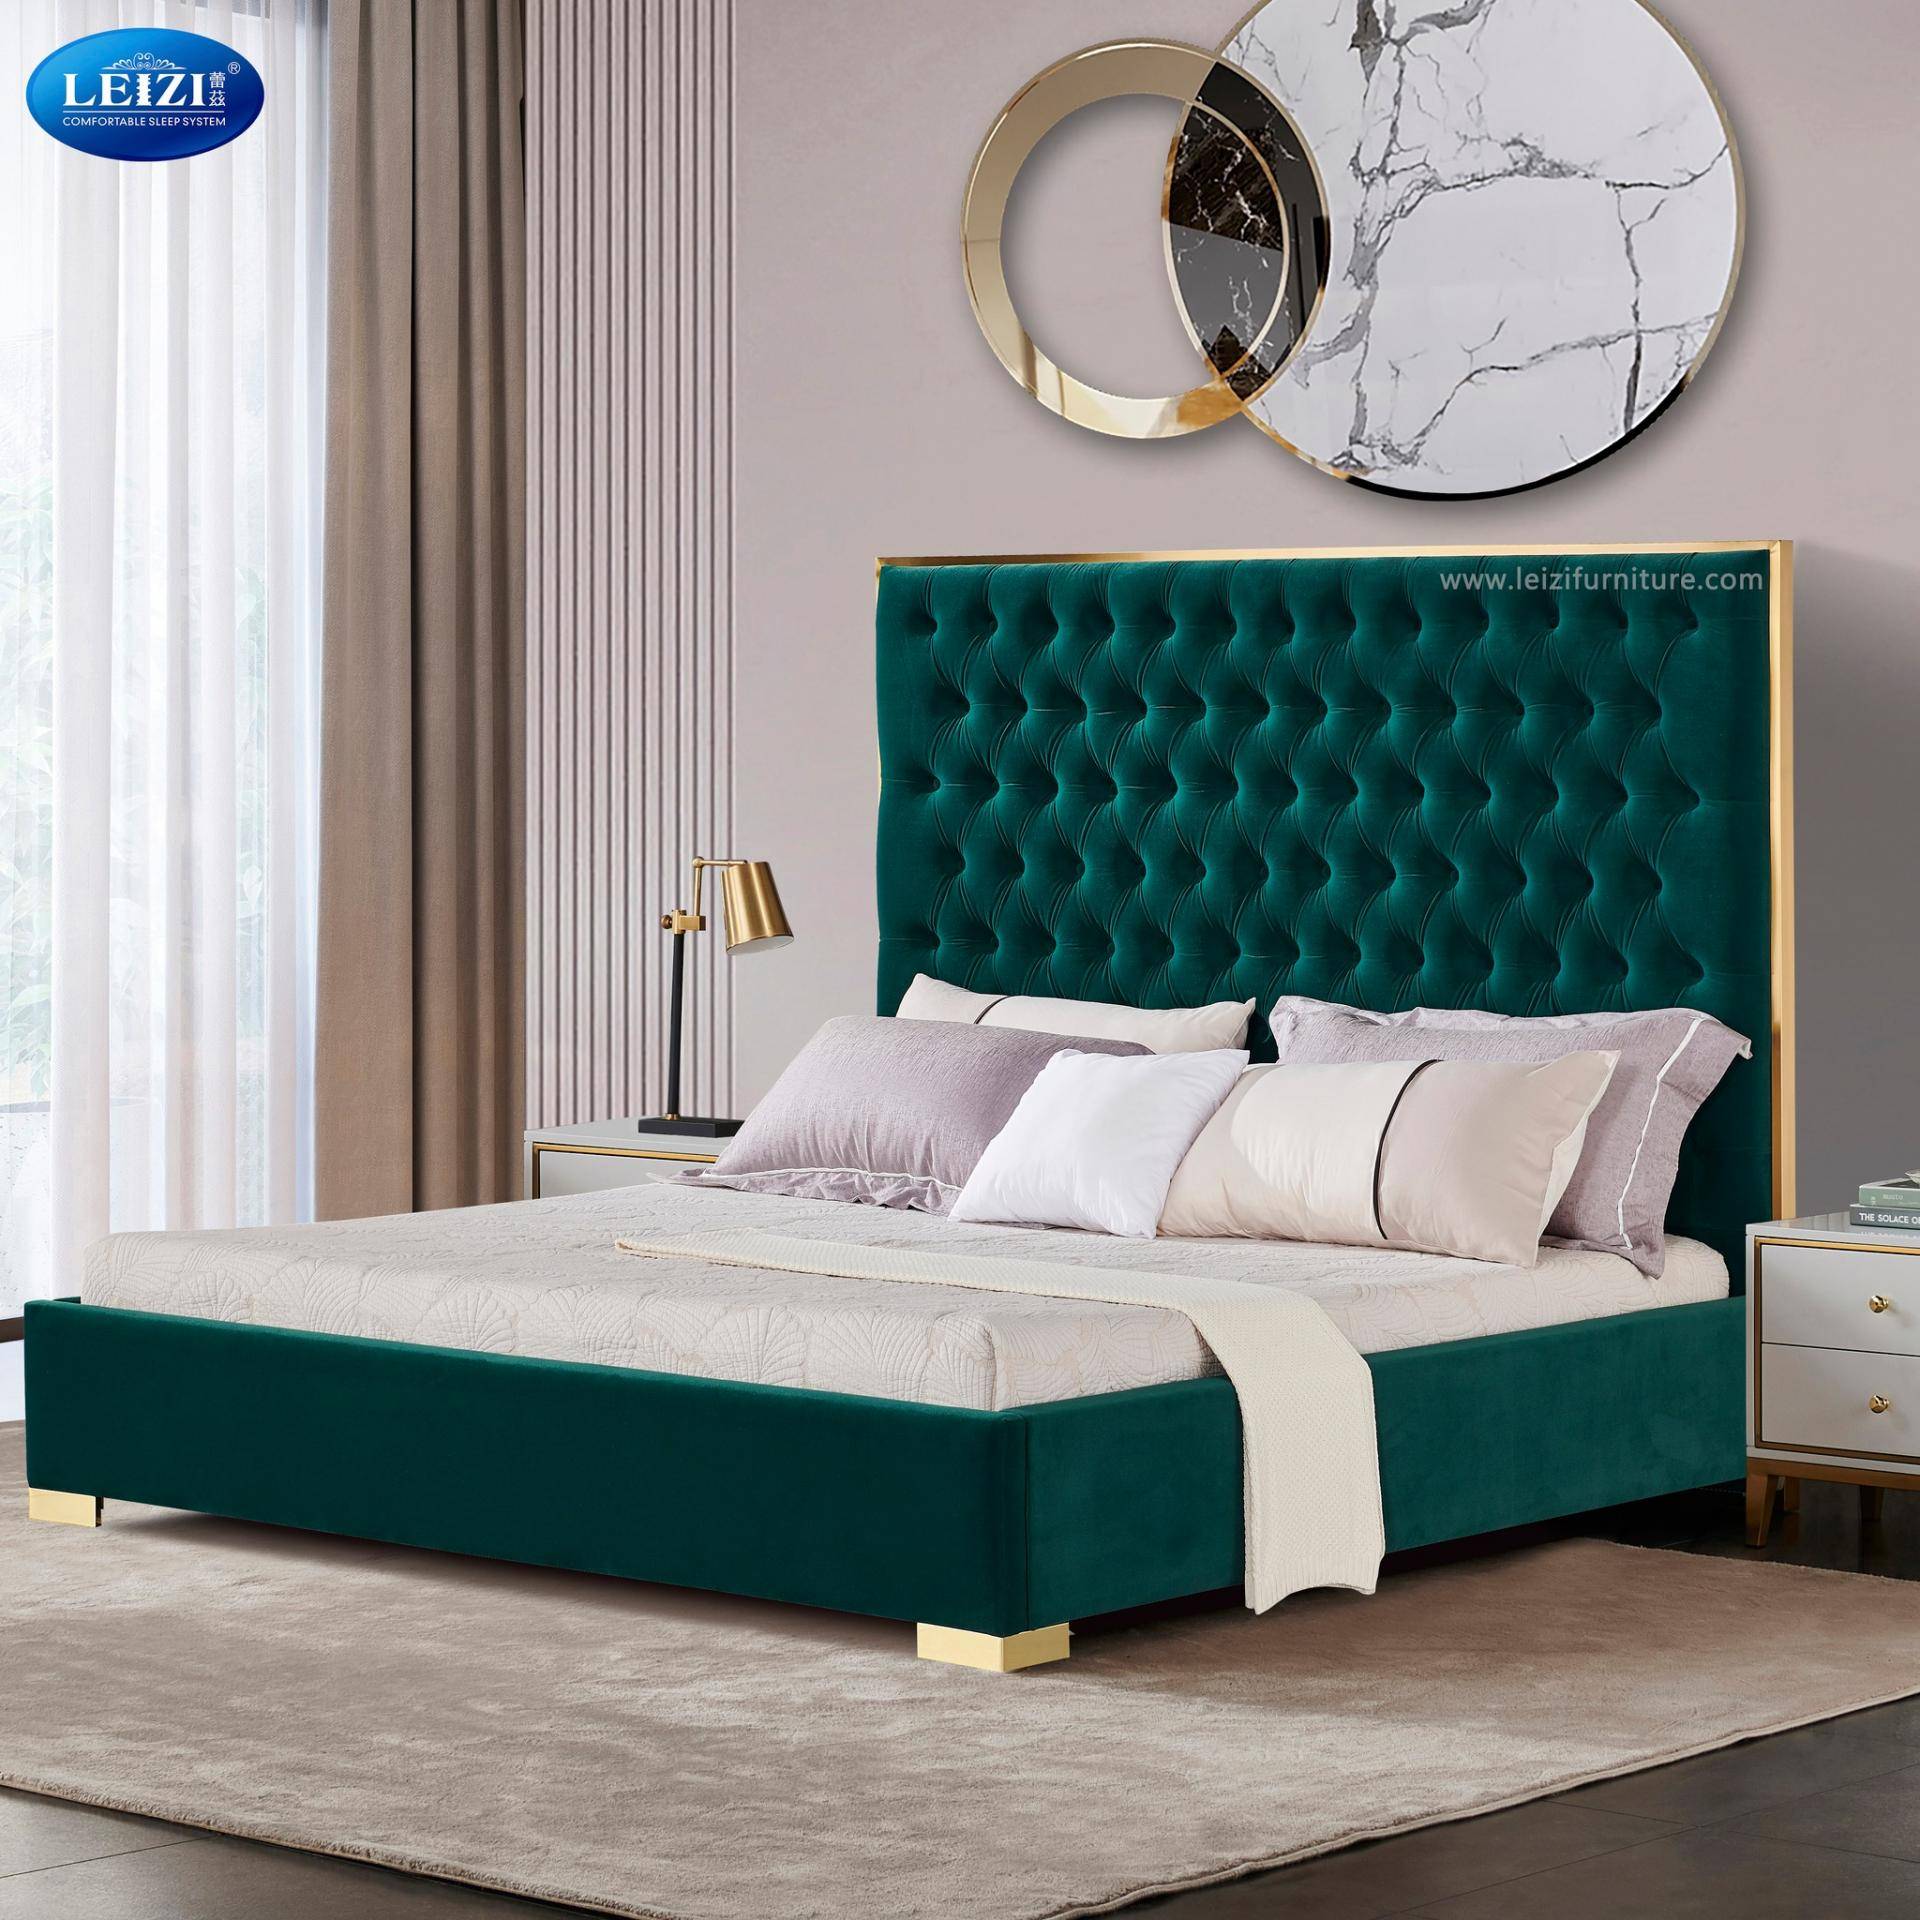 How To Choose A Comfortable Bed? 